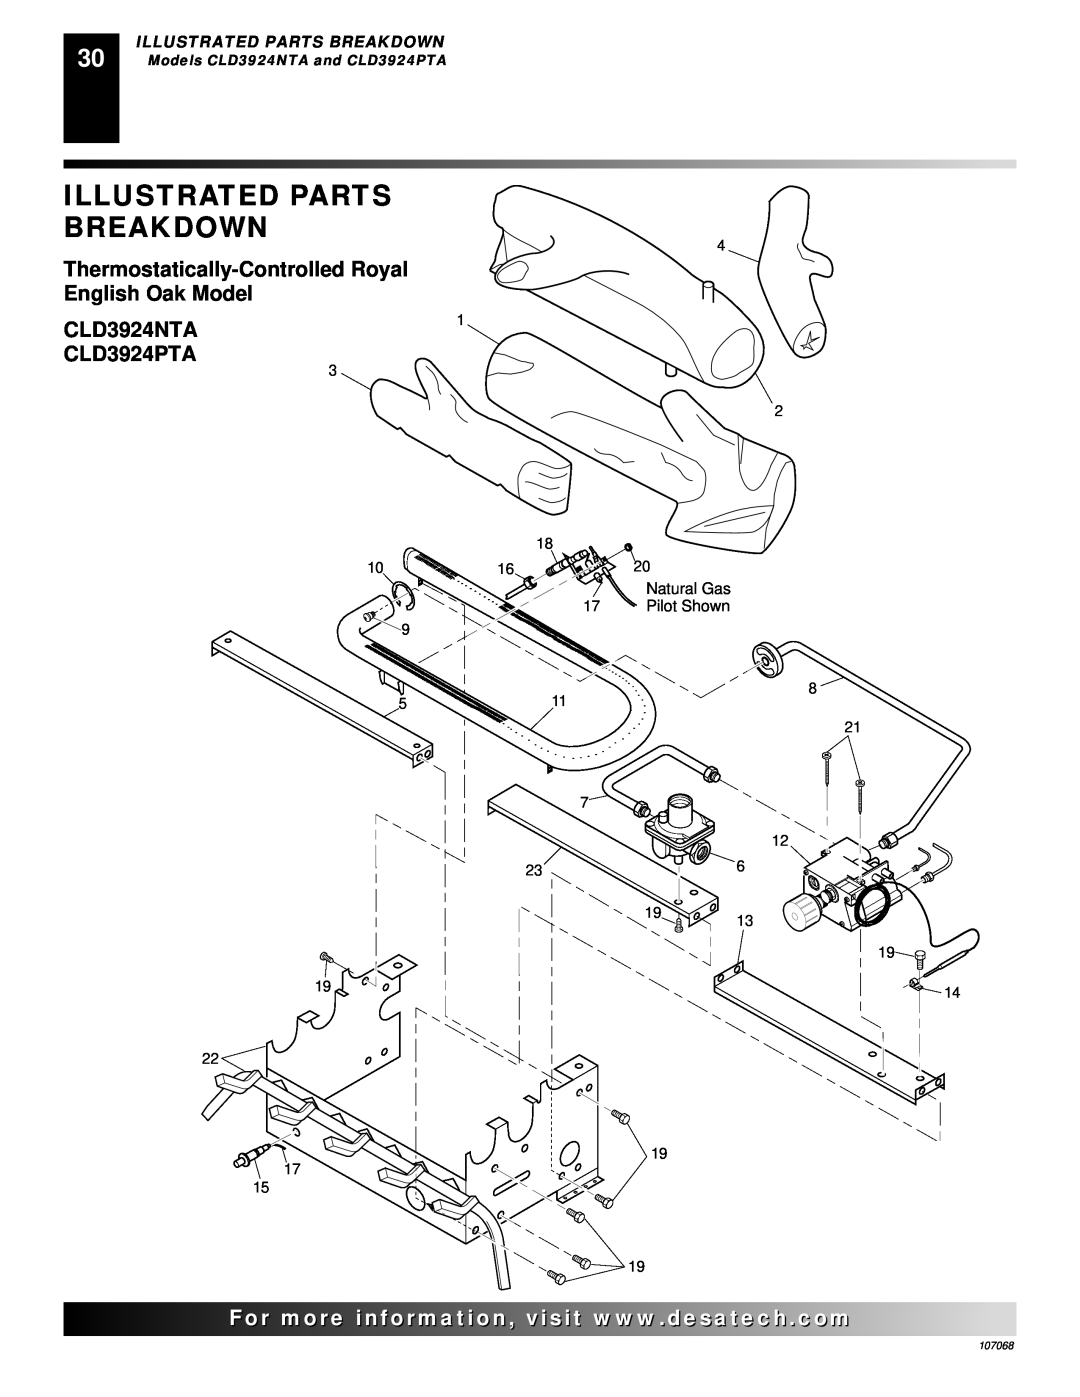 Desa CLD3018PA, CGS3124N, CLD3018NA CLD3924NTA CLD3924PTA, Illustrated Parts Breakdown, Models CLD3924NTA and CLD3924PTA 